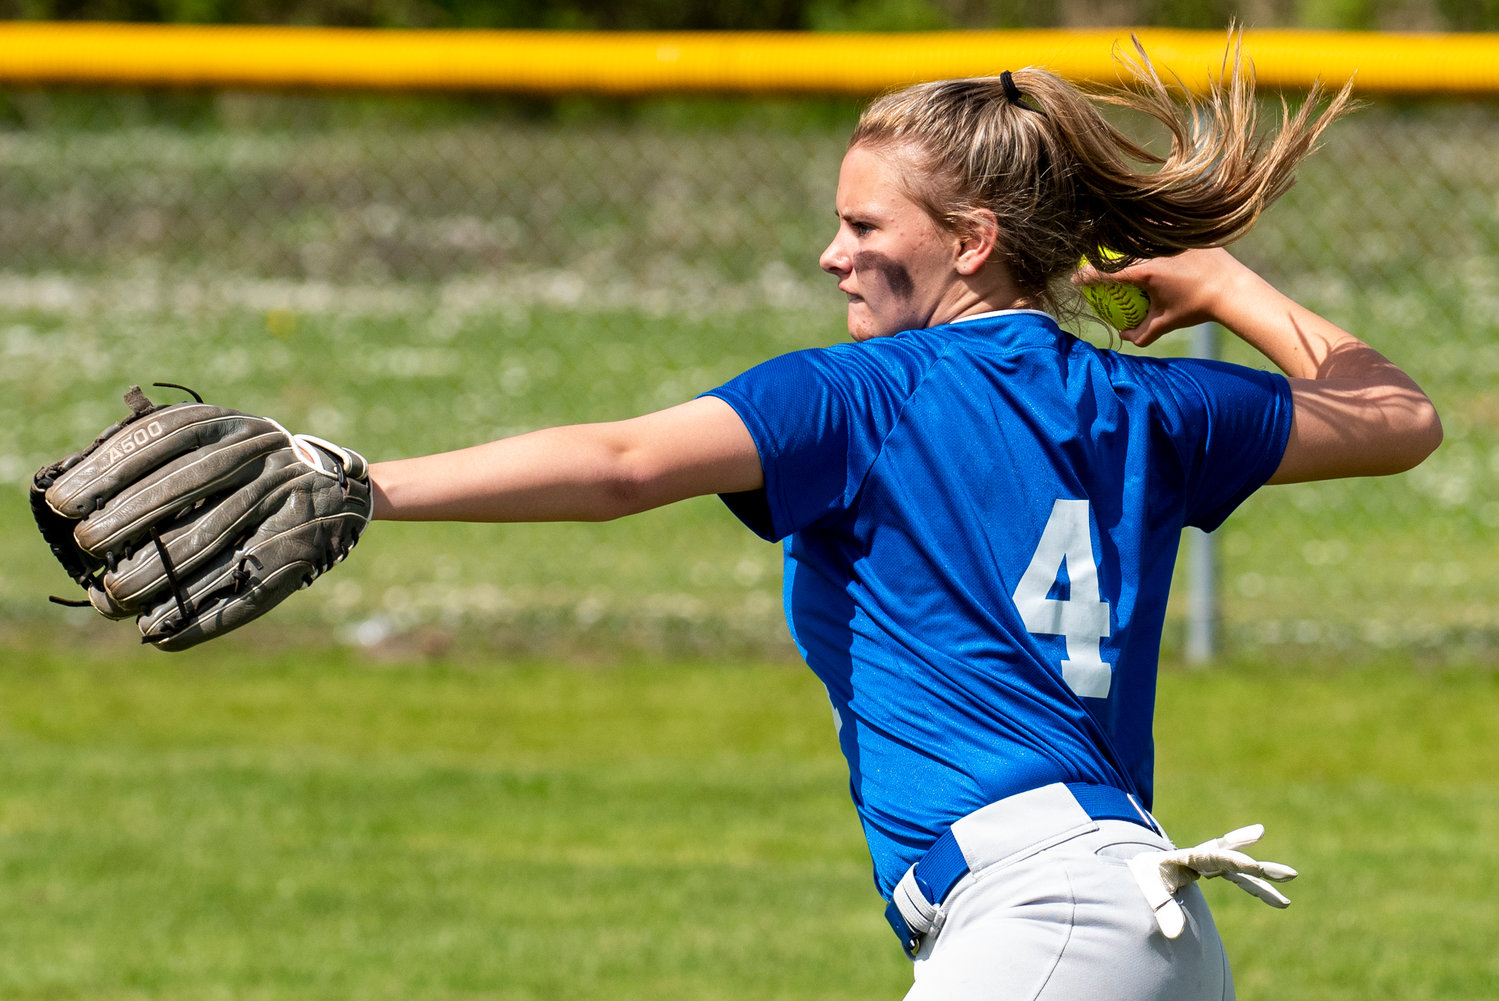 Adna's Gracie Beaulieu makes a throw from right field during a home game against Onalaska on May 4.